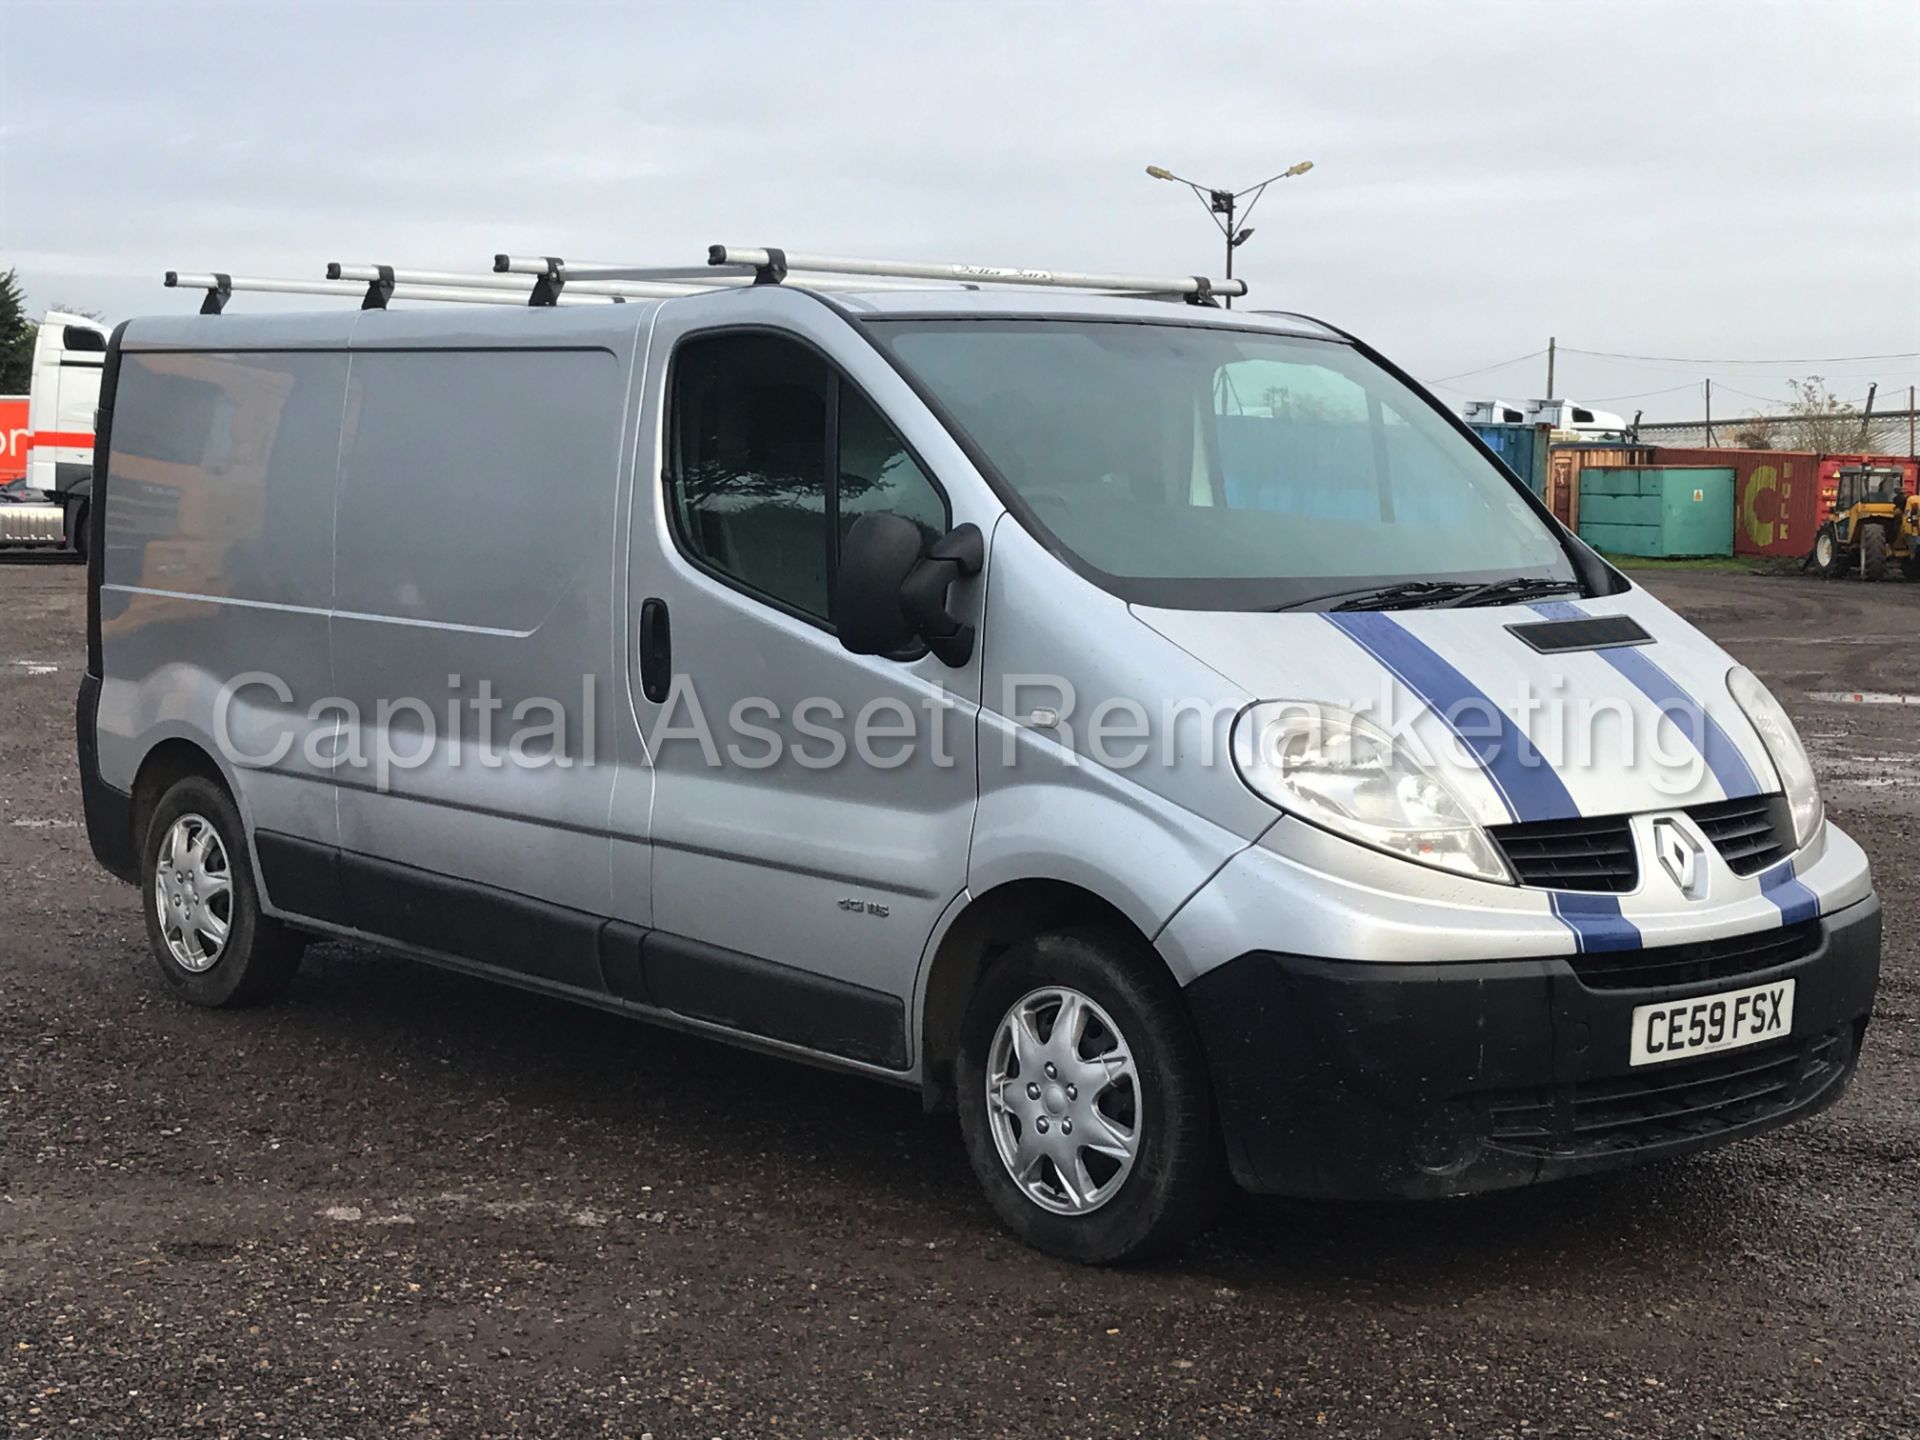 RENAULT TRAFIC LL29 DCI 115 (2010 MODEL) '2.0 DCI - 115 PS - 6 SPEED - LWB' **AIR CON**